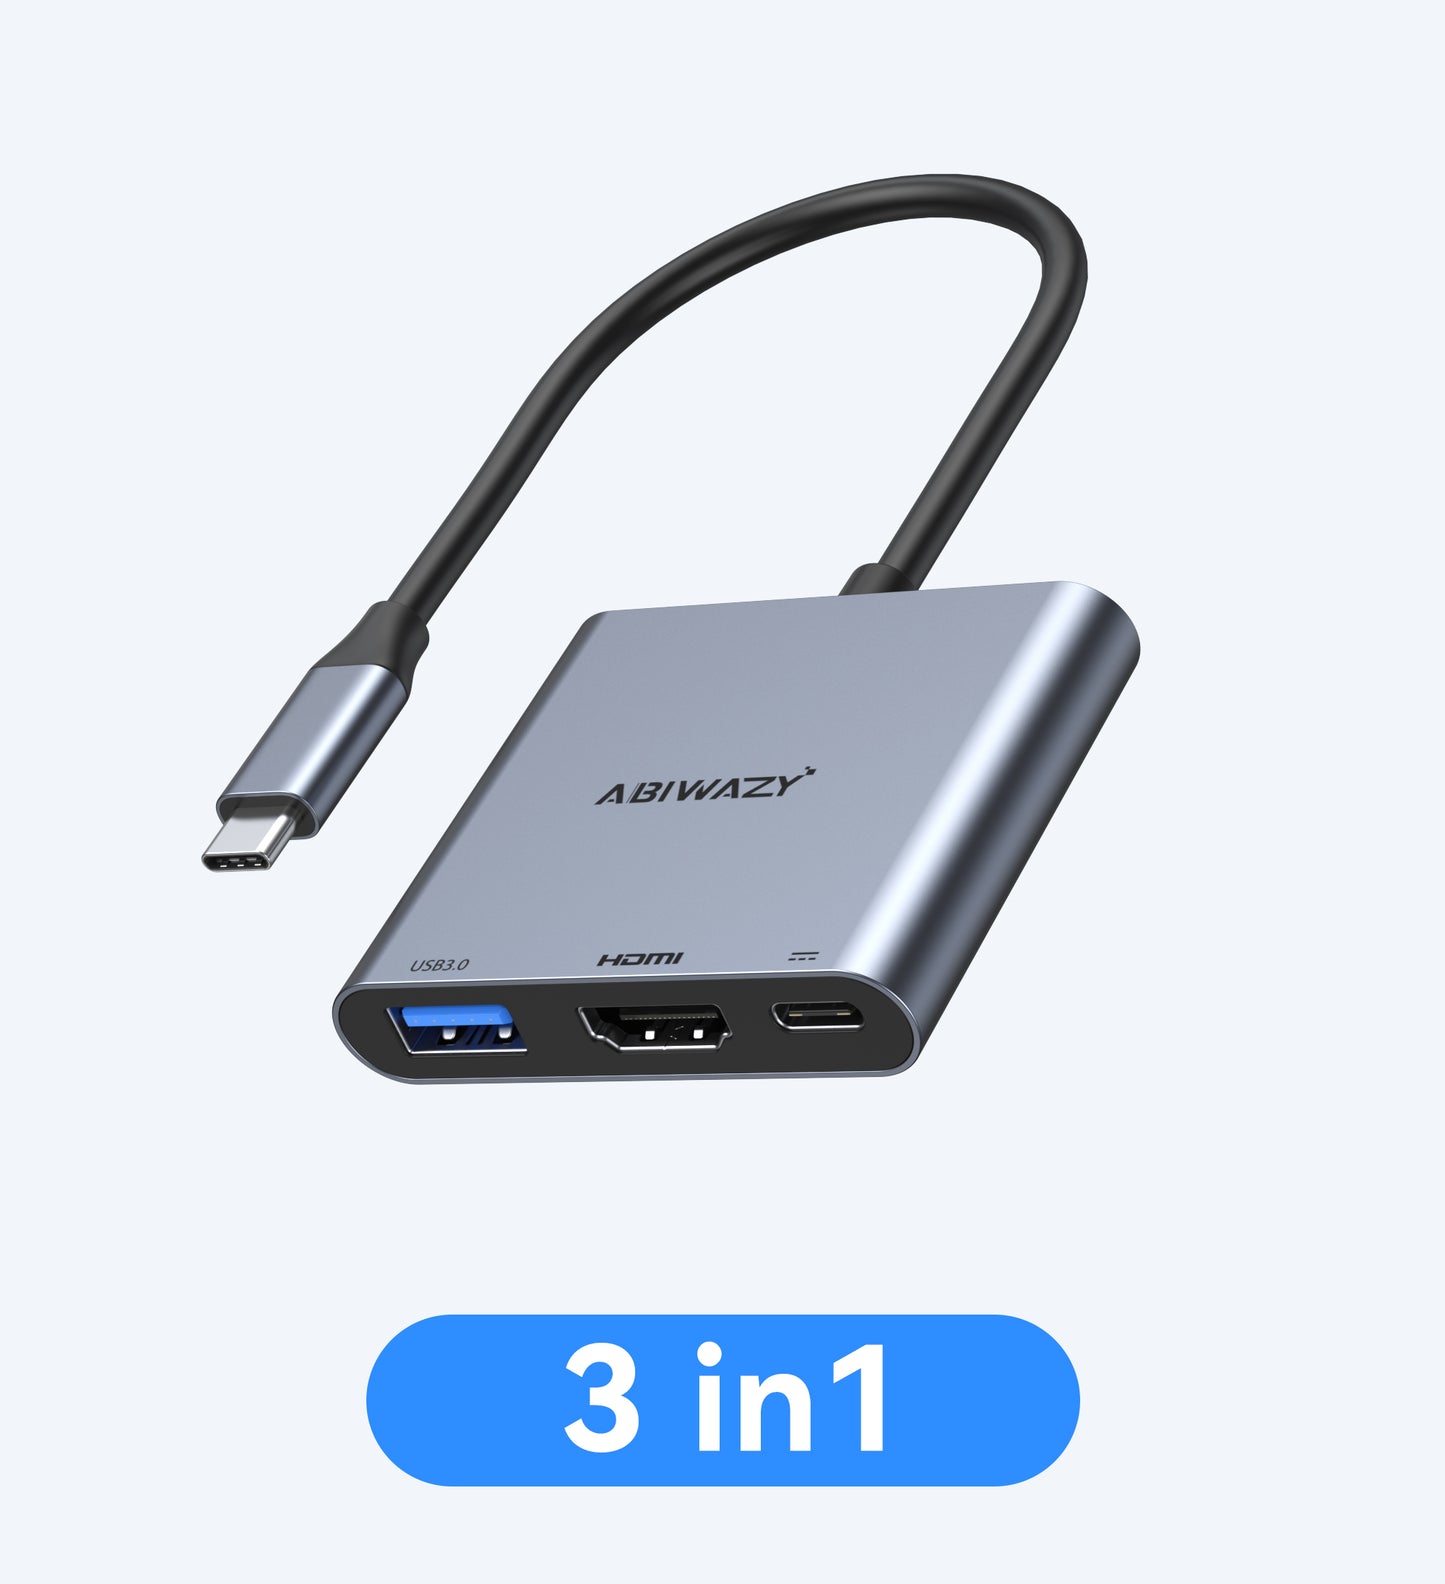 USB C to HDMI Multiport Adapter with 4K HDMI Output,Type-C Hub Converter to 4K HDMI USB 3.0 PD Charging Port,USB-C Digital AV Multiport Adapter for MacBook Pro/air,iPad Pro &More USB-C Devices